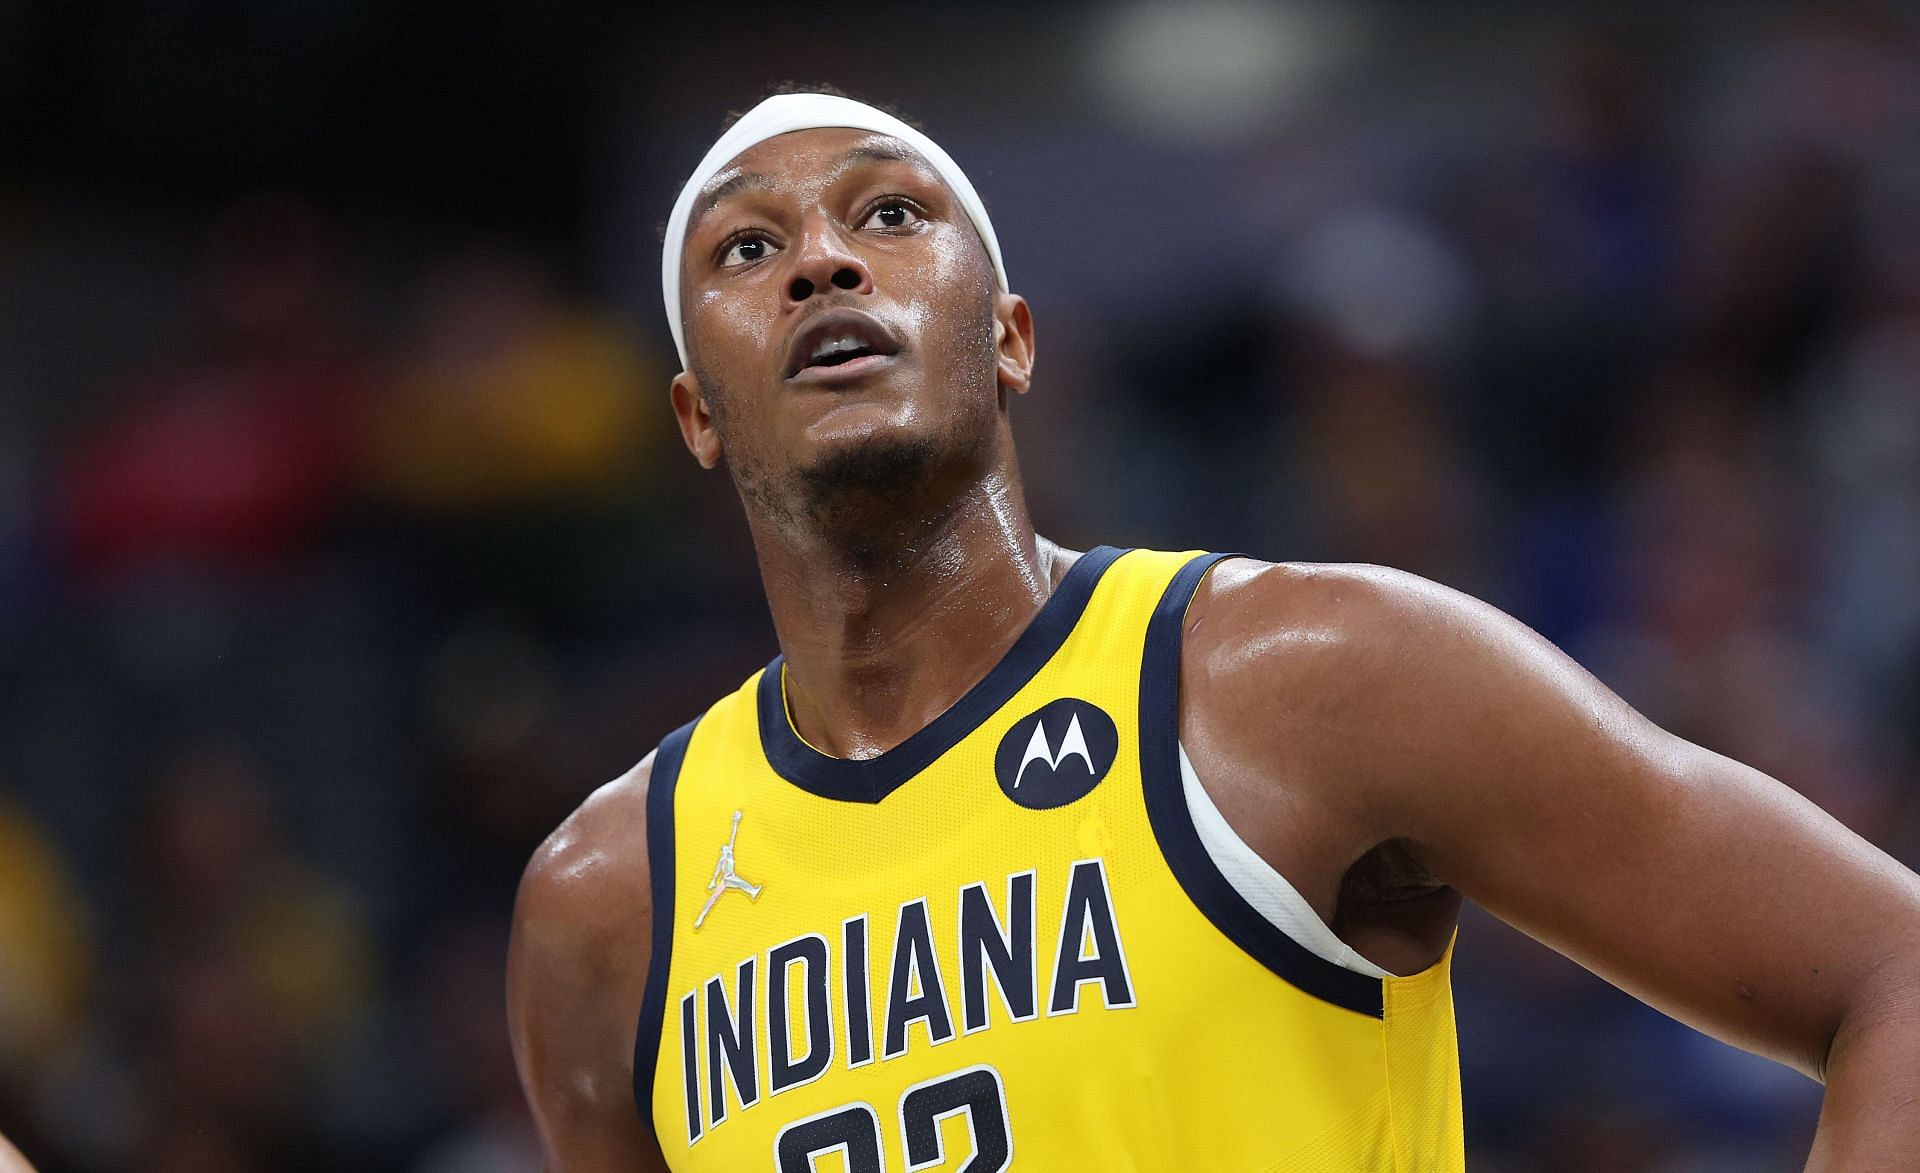 Myles Turner answers several of the Nets' interior issues.